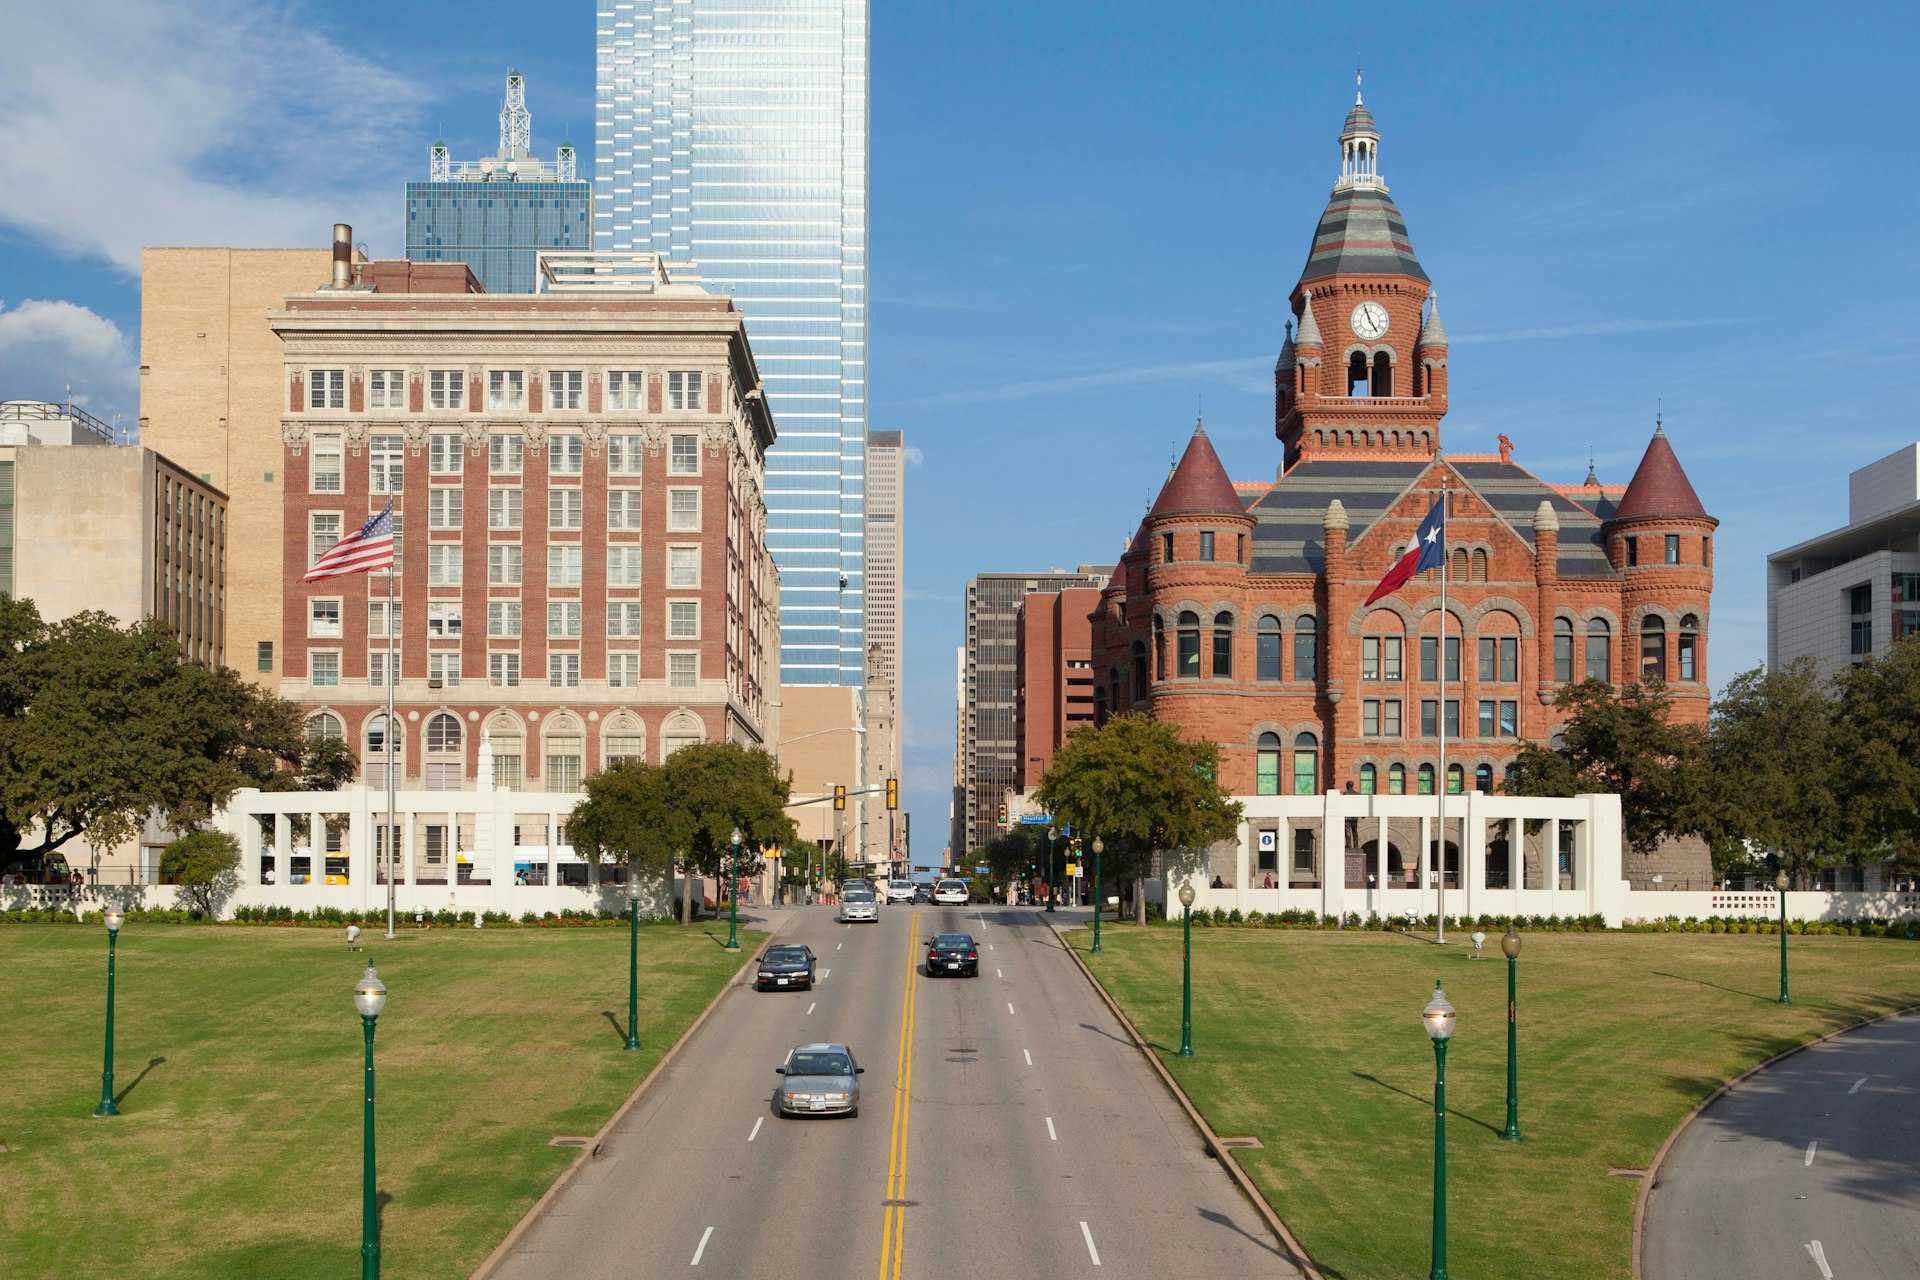 Grassy Knoll (site of Kennedy assassination), Dealey Plaza Historic District, West End, Dallas, Texas, United States of America